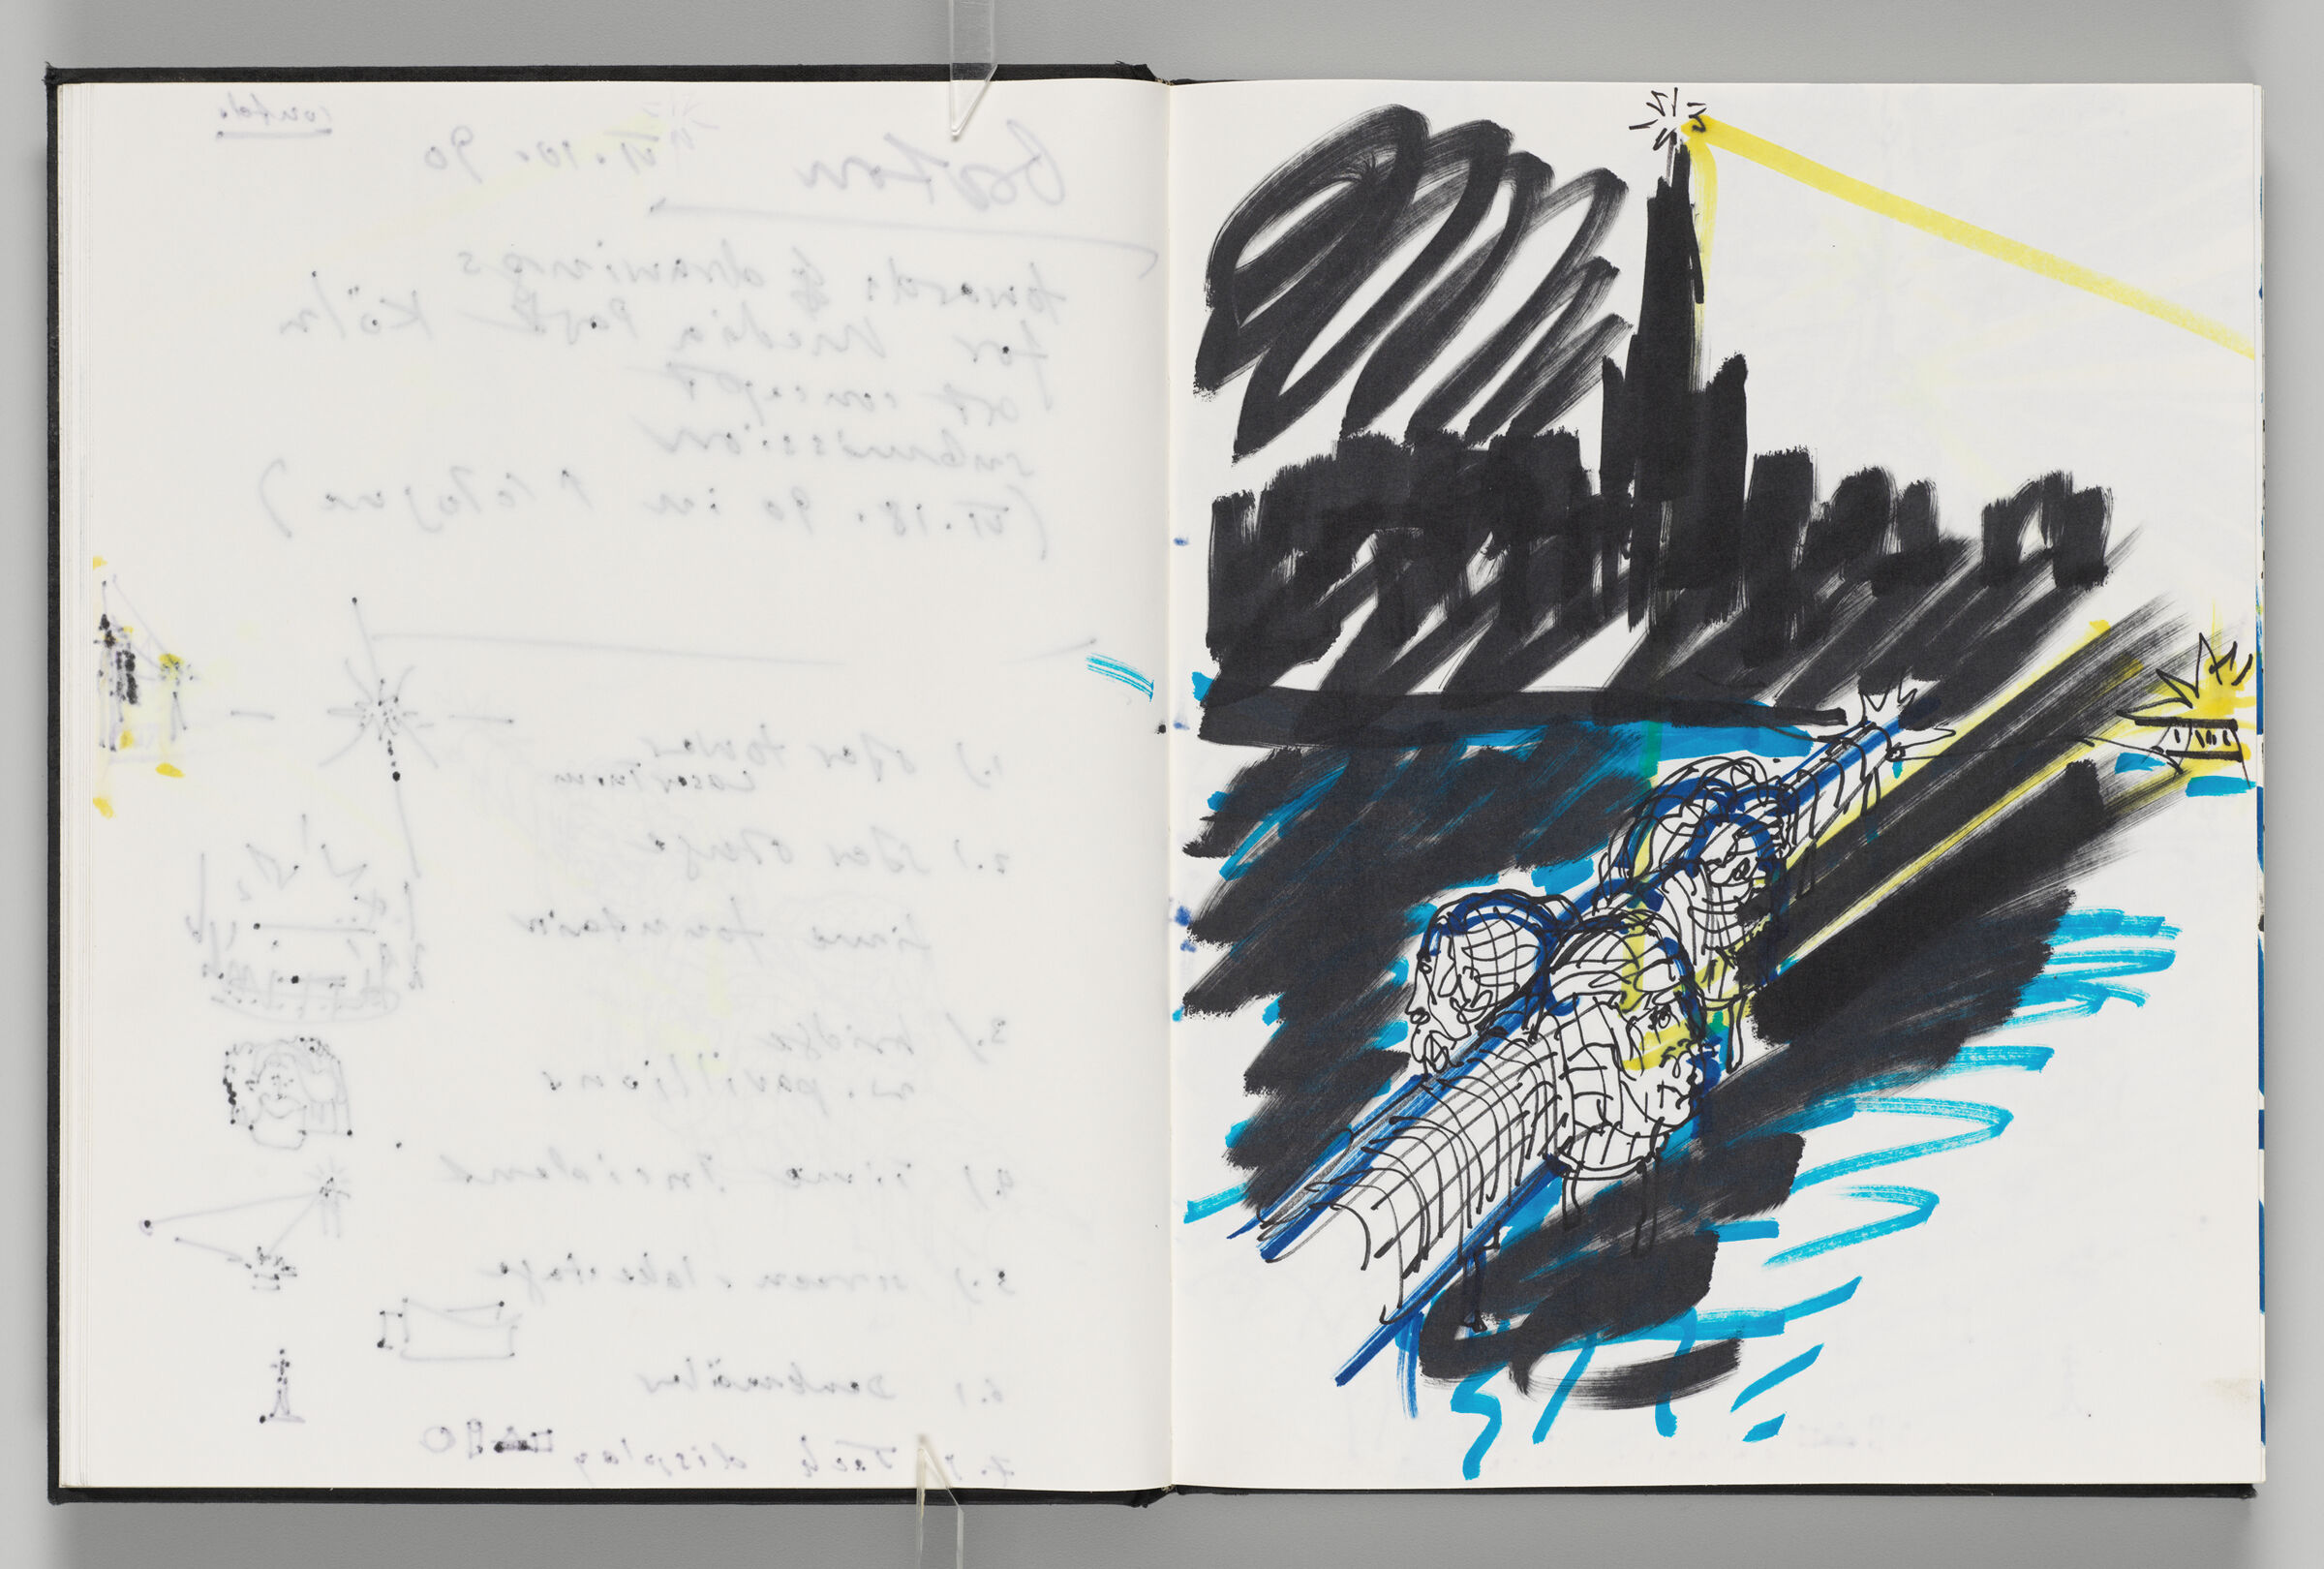 Untitled (Bleed-Through Of Previous Page, Left Page); Untitled (Design For Cologne Project, Right Page)
